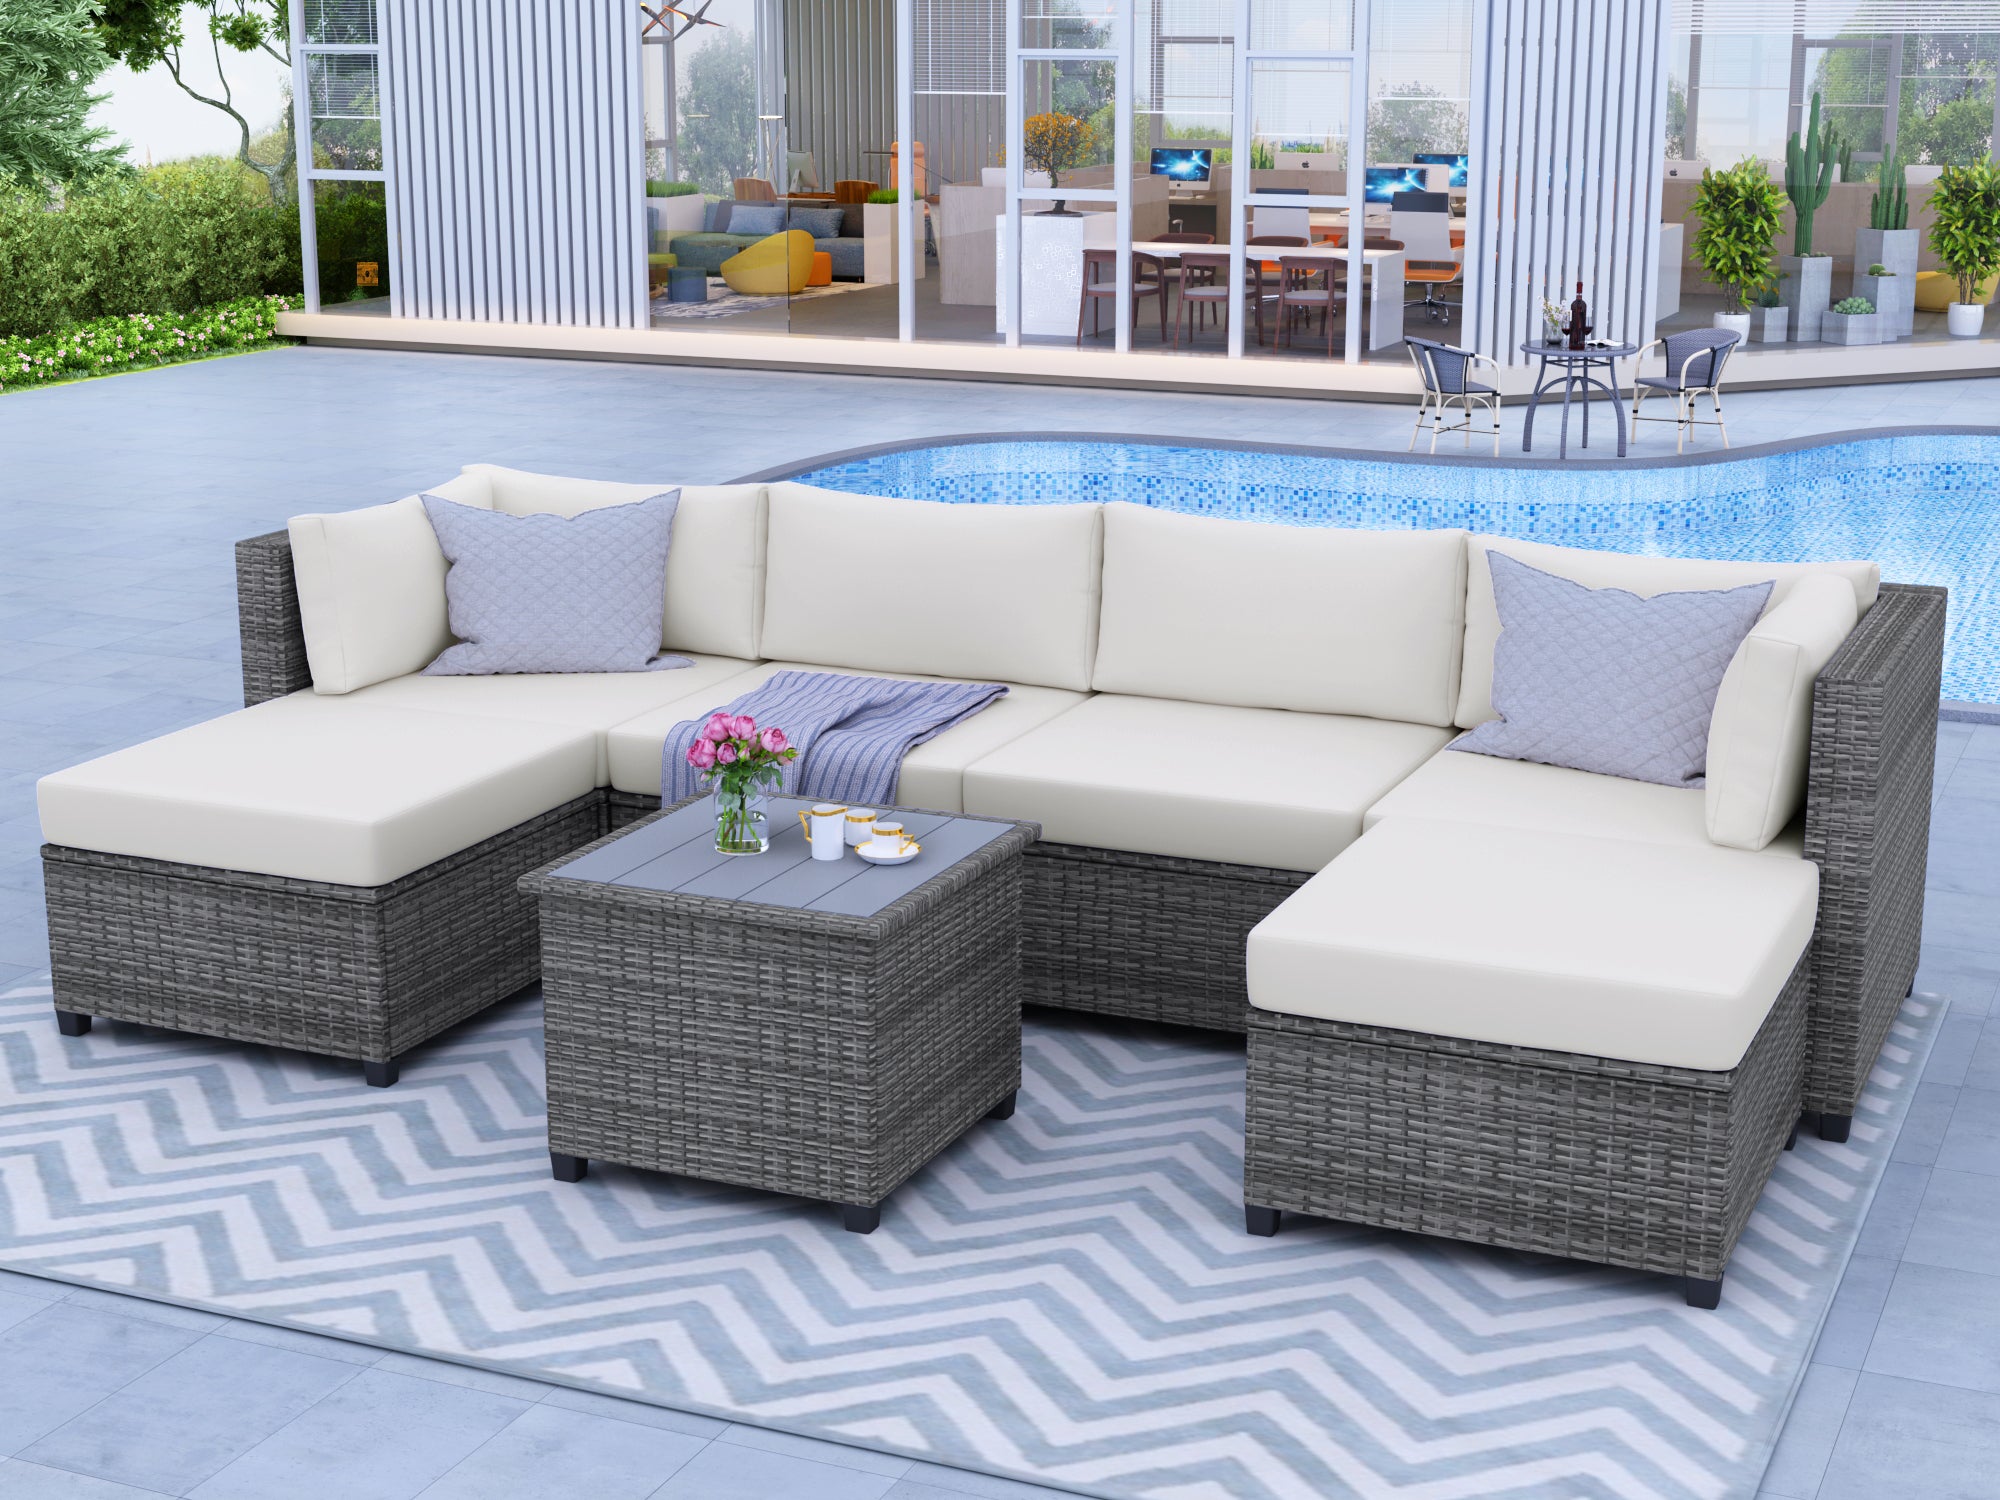 Biscayne 7-Pieces Modular Outdoor Patio Sectional with Coffee Table